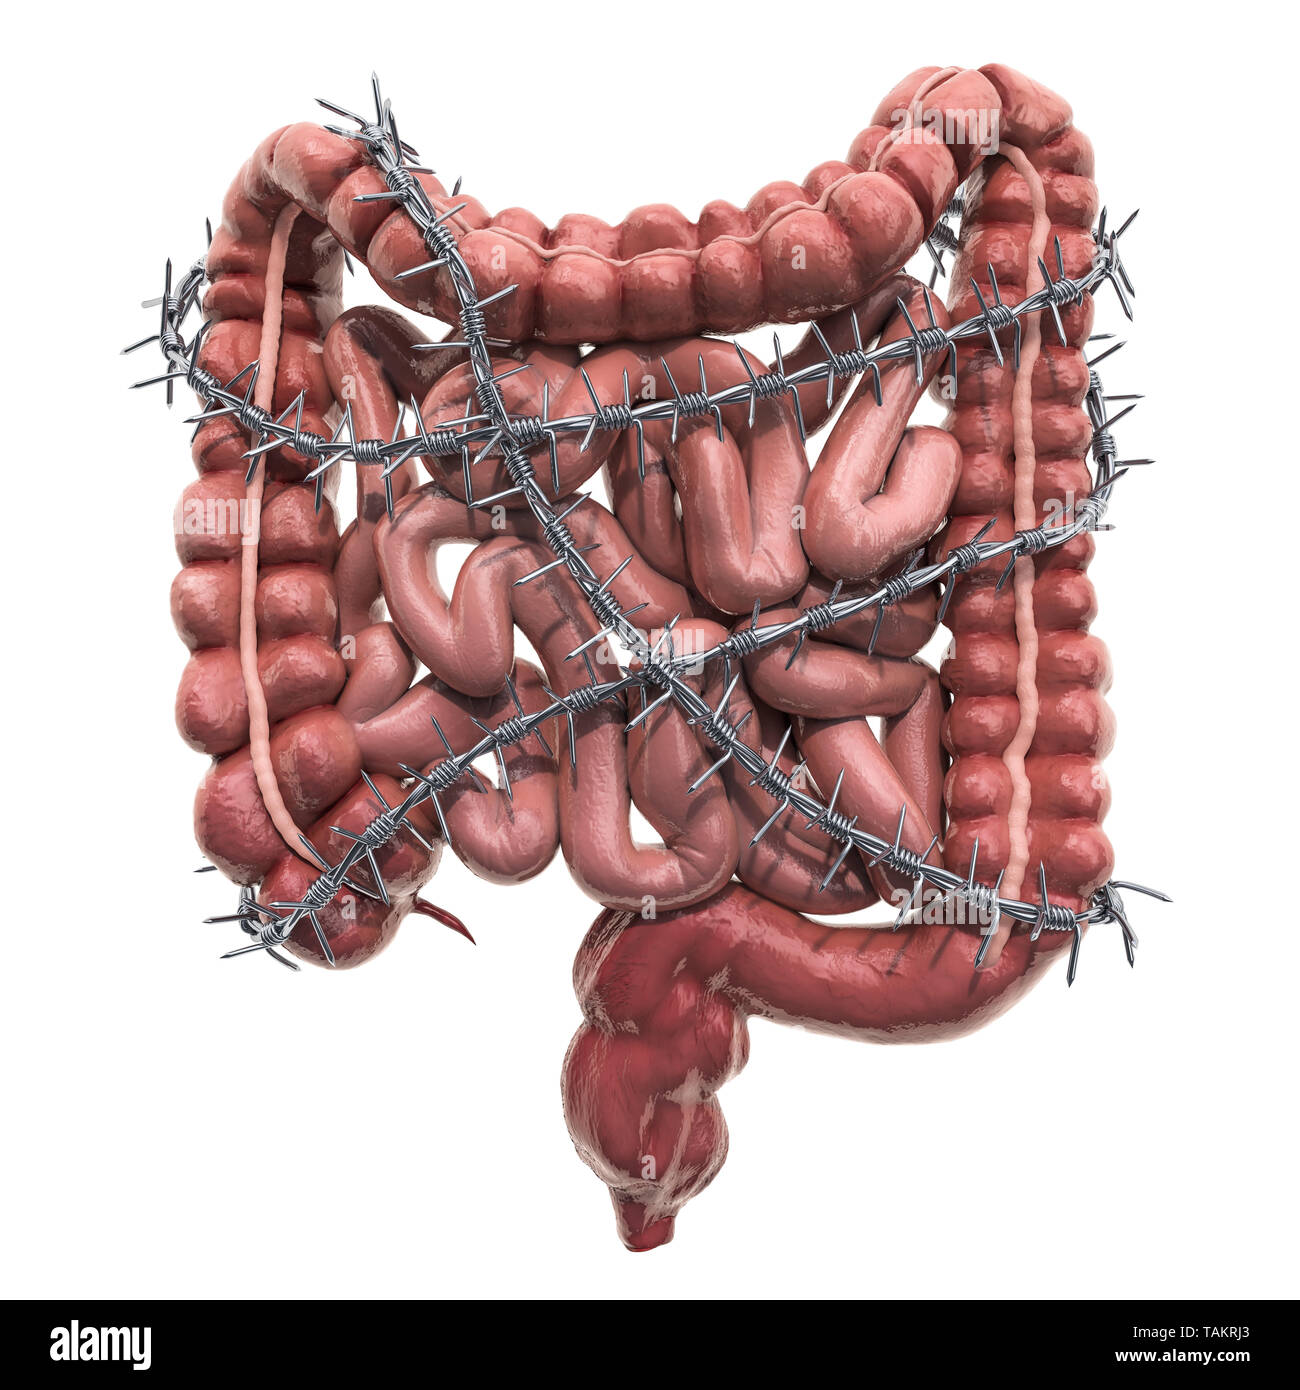 Abdominal pain concept. Human intestines with barbed wire. 3D rendering isolated on white background Stock Photo